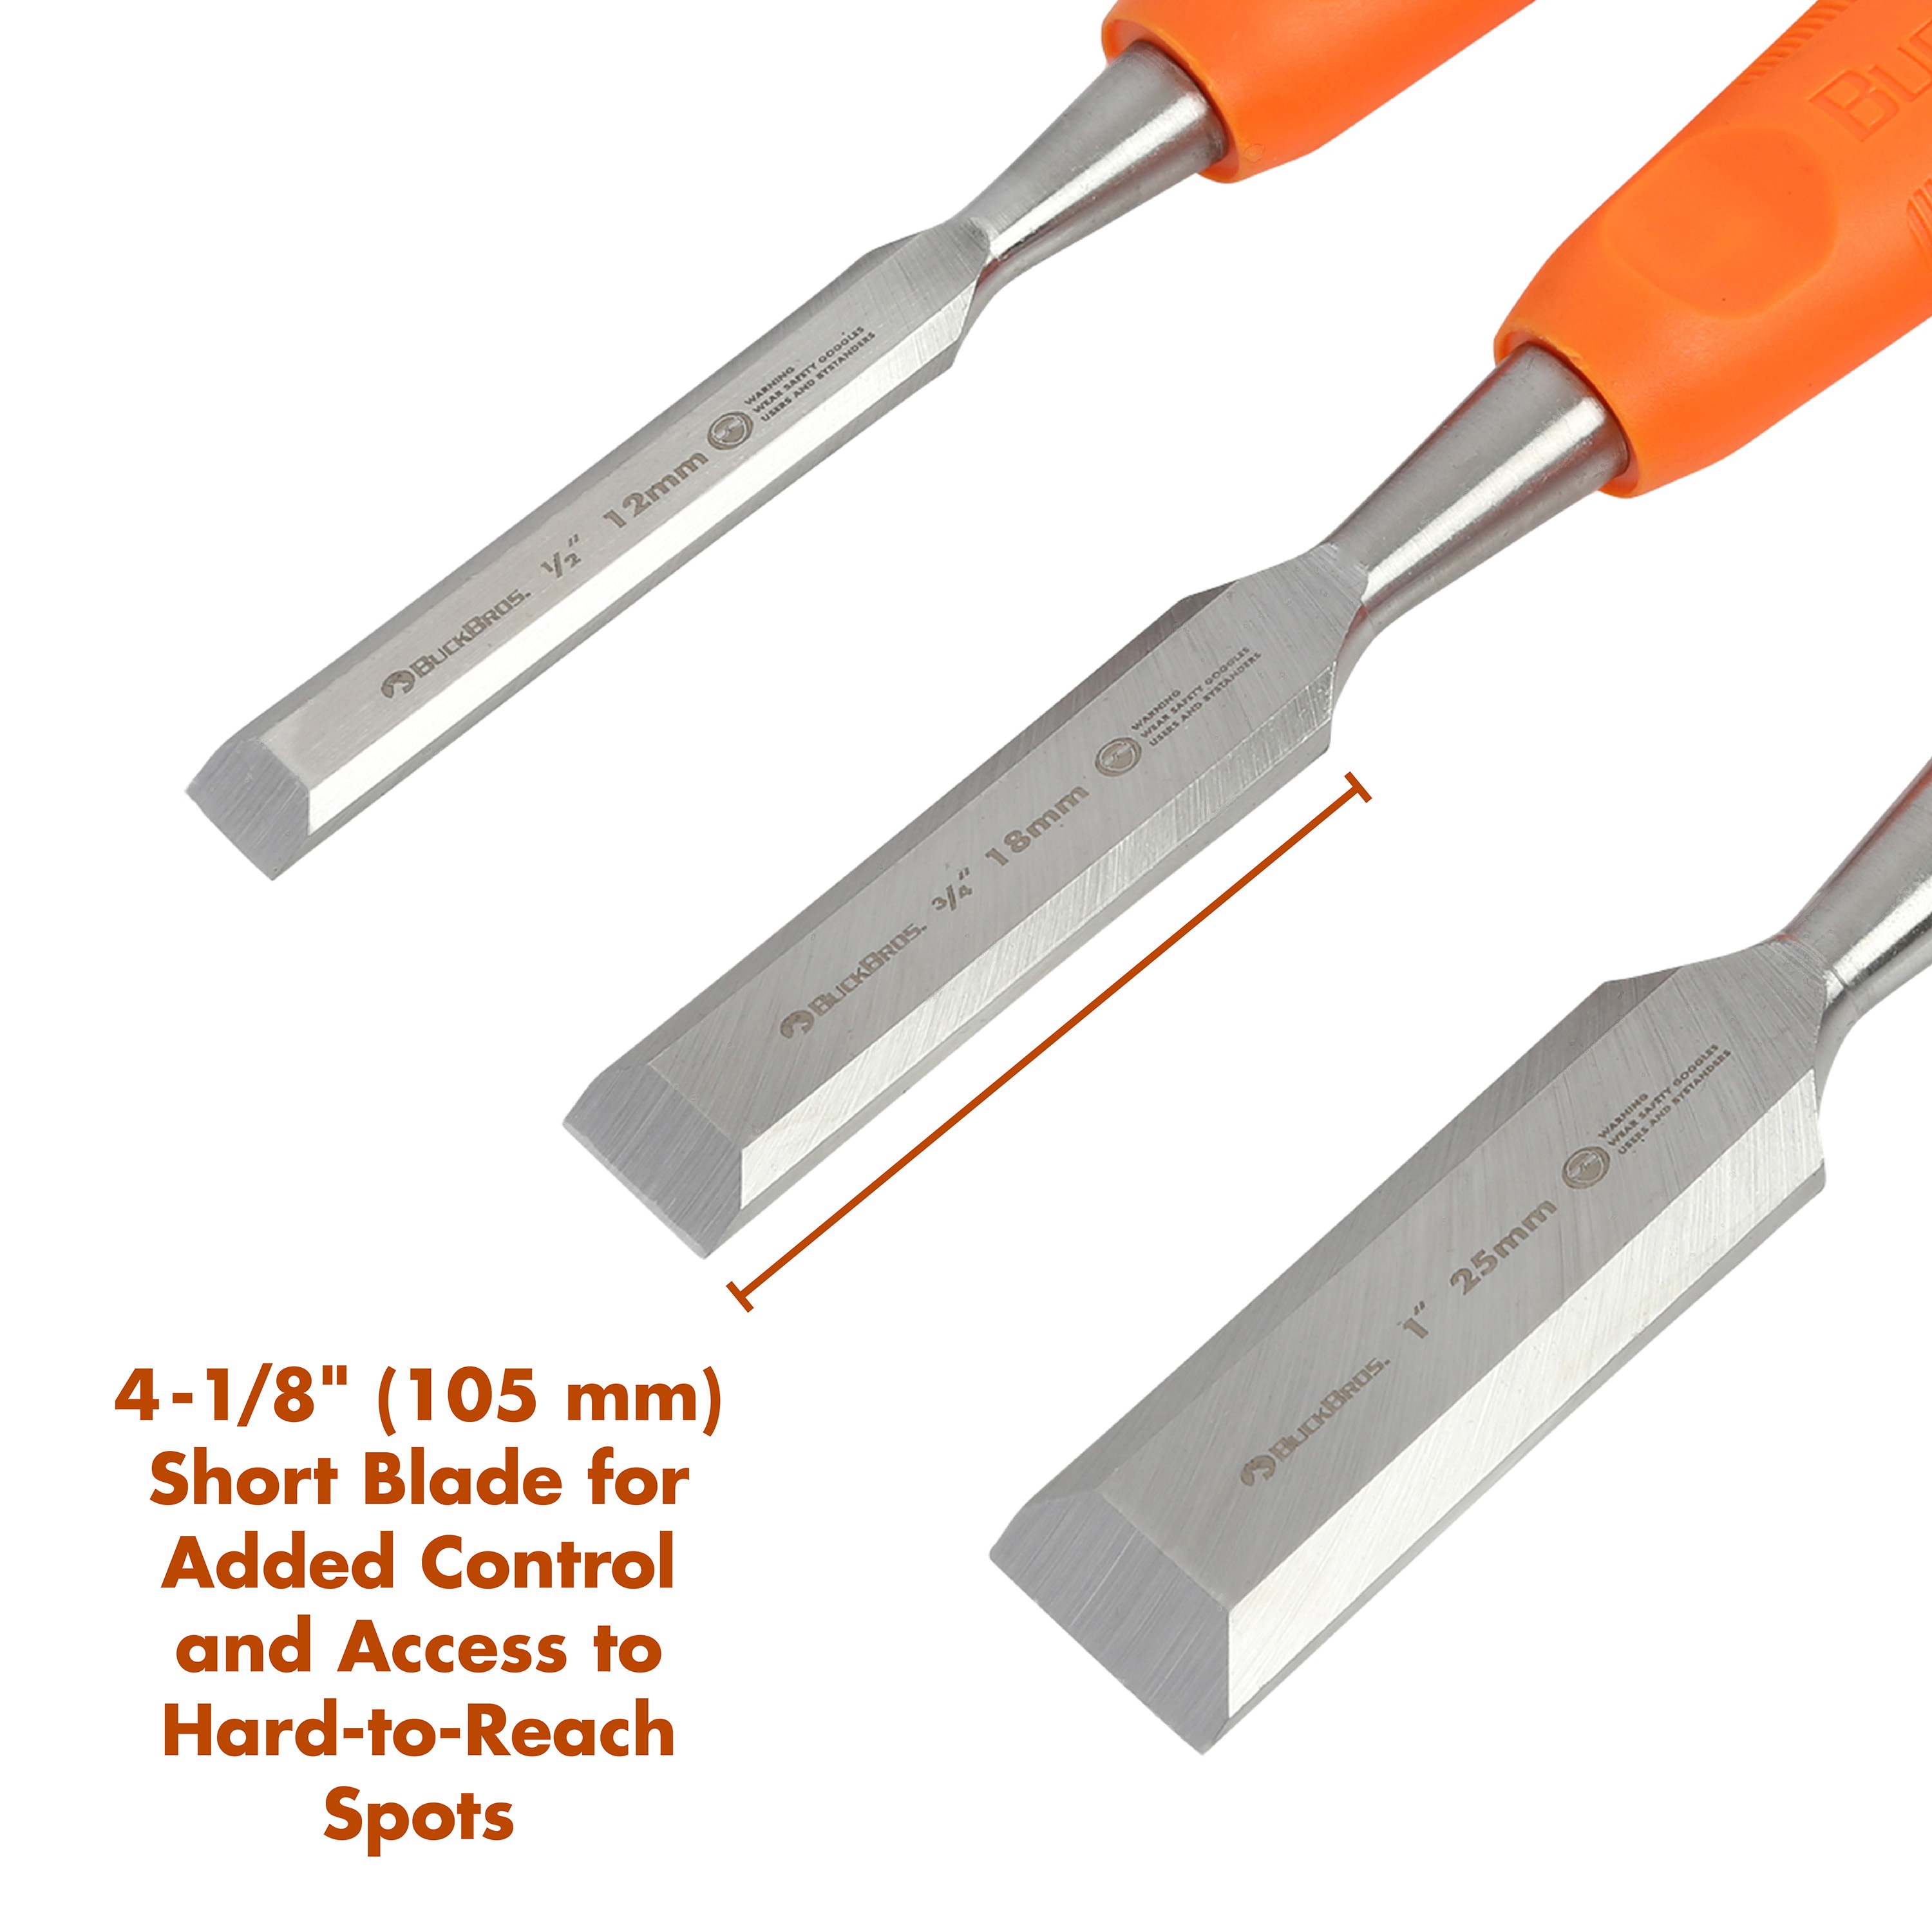 Wood Chisels: Prime Choices for Woodworking